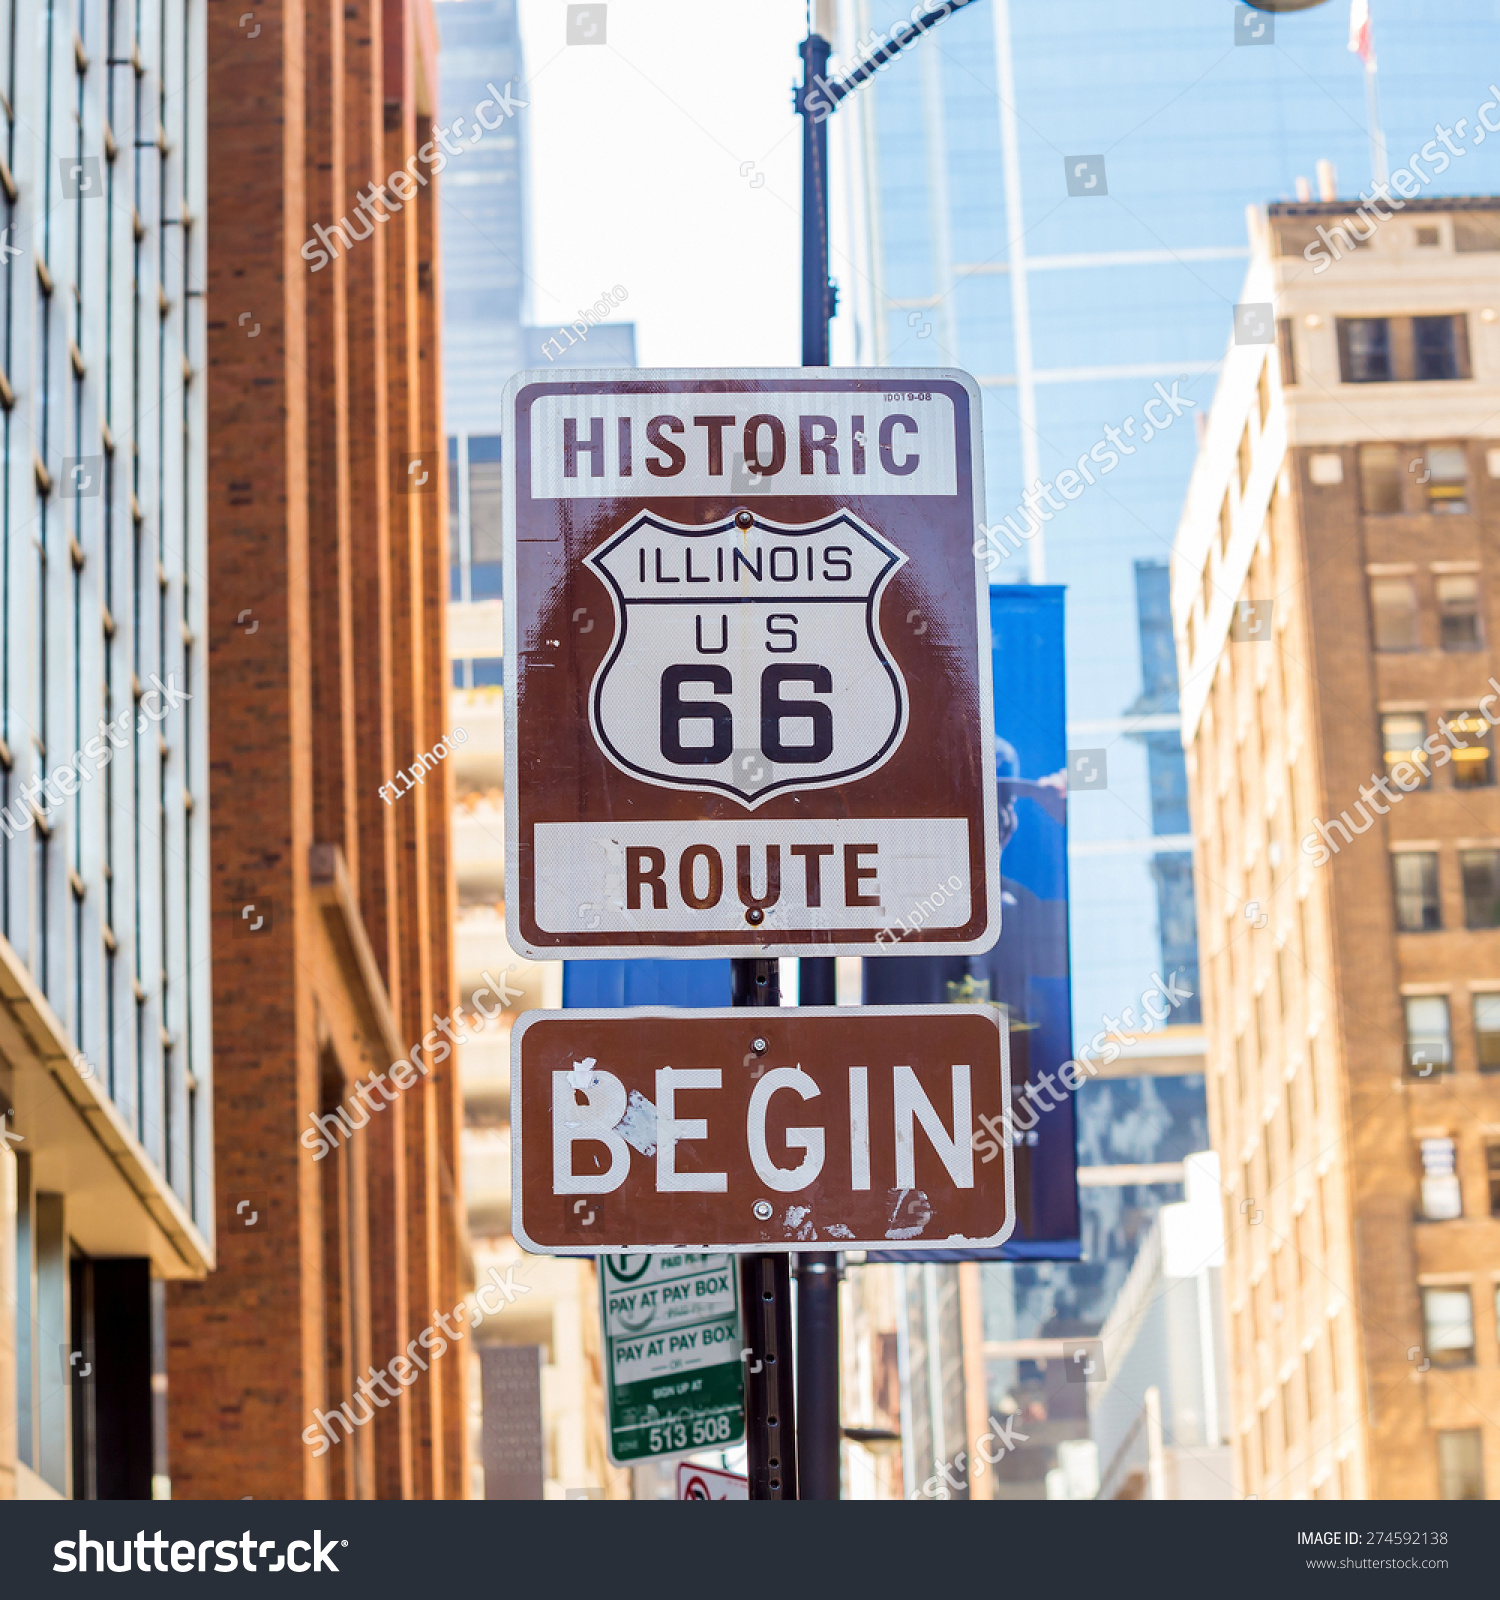 Route 66 sign, the beginning of historic Route 66, leading through Chicago, Illinois. #274592138